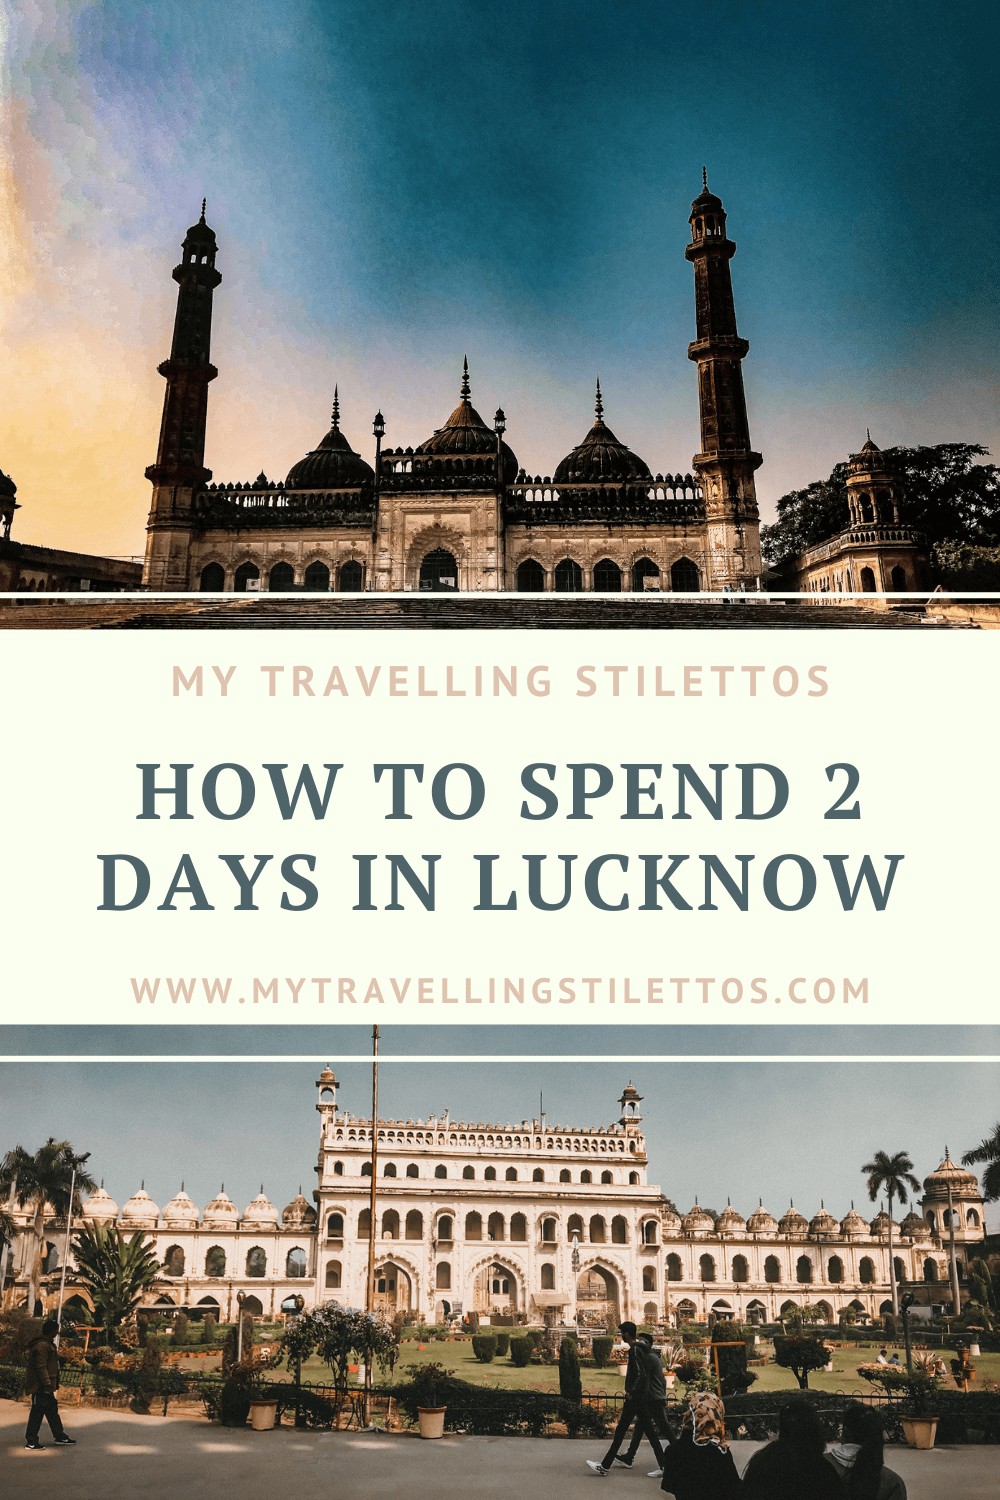 How to Spend 2 Days in Lucknow